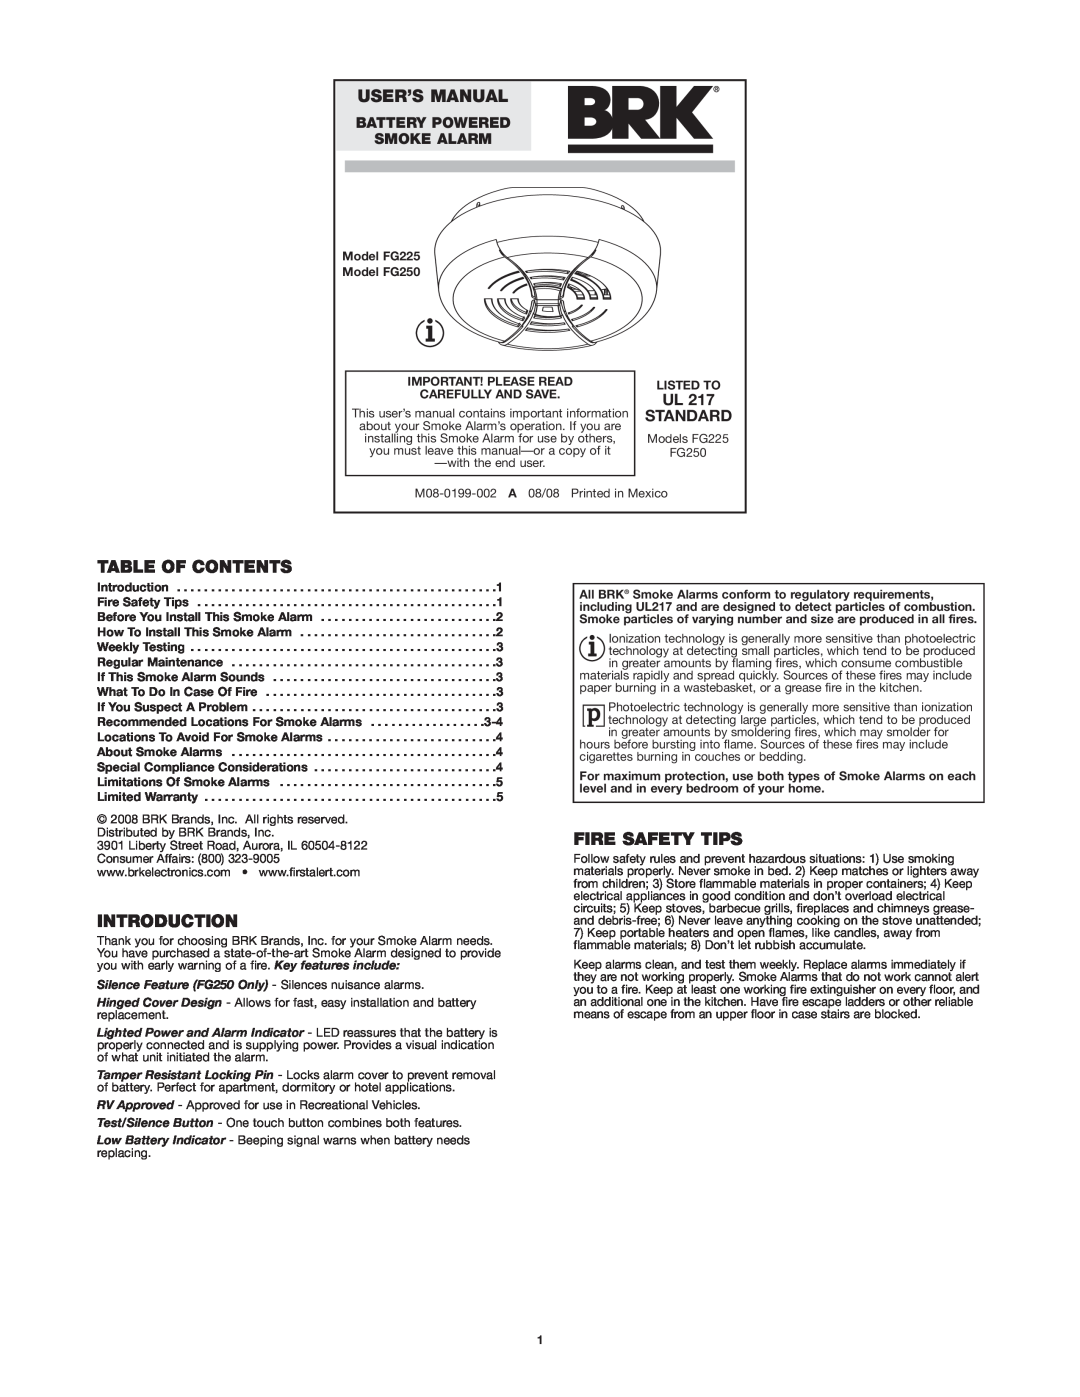 BRK electronic FG250 user manual User’S Manual, Table Of Contents, Introduction, Fire Safety Tips, Standard, Smoke Alarm 